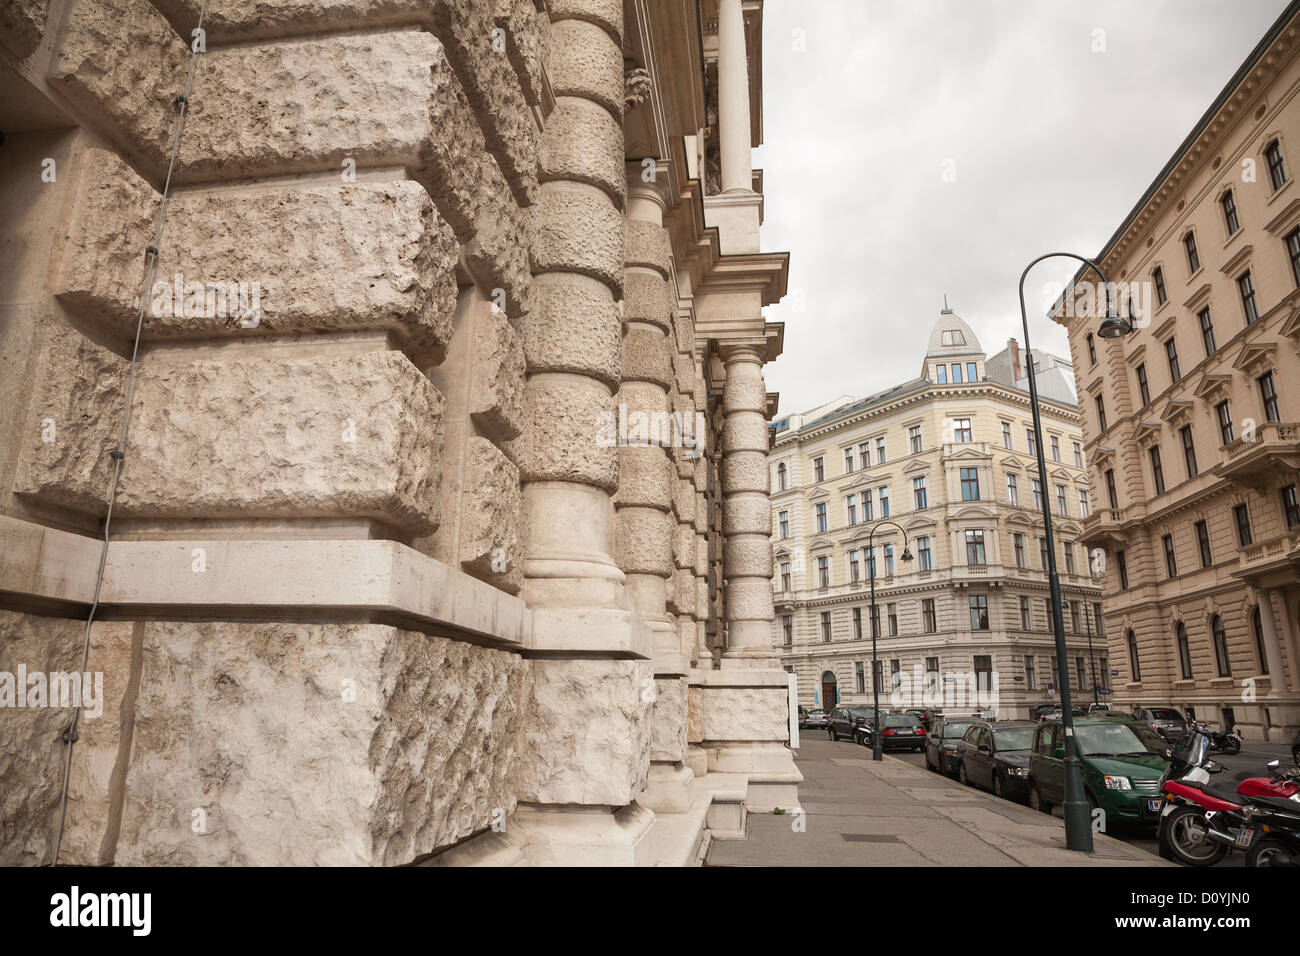 An empty street in Vienna on an overcast day, the cream facades of old multistory buildings made of out large pieces of stone. Stock Photo